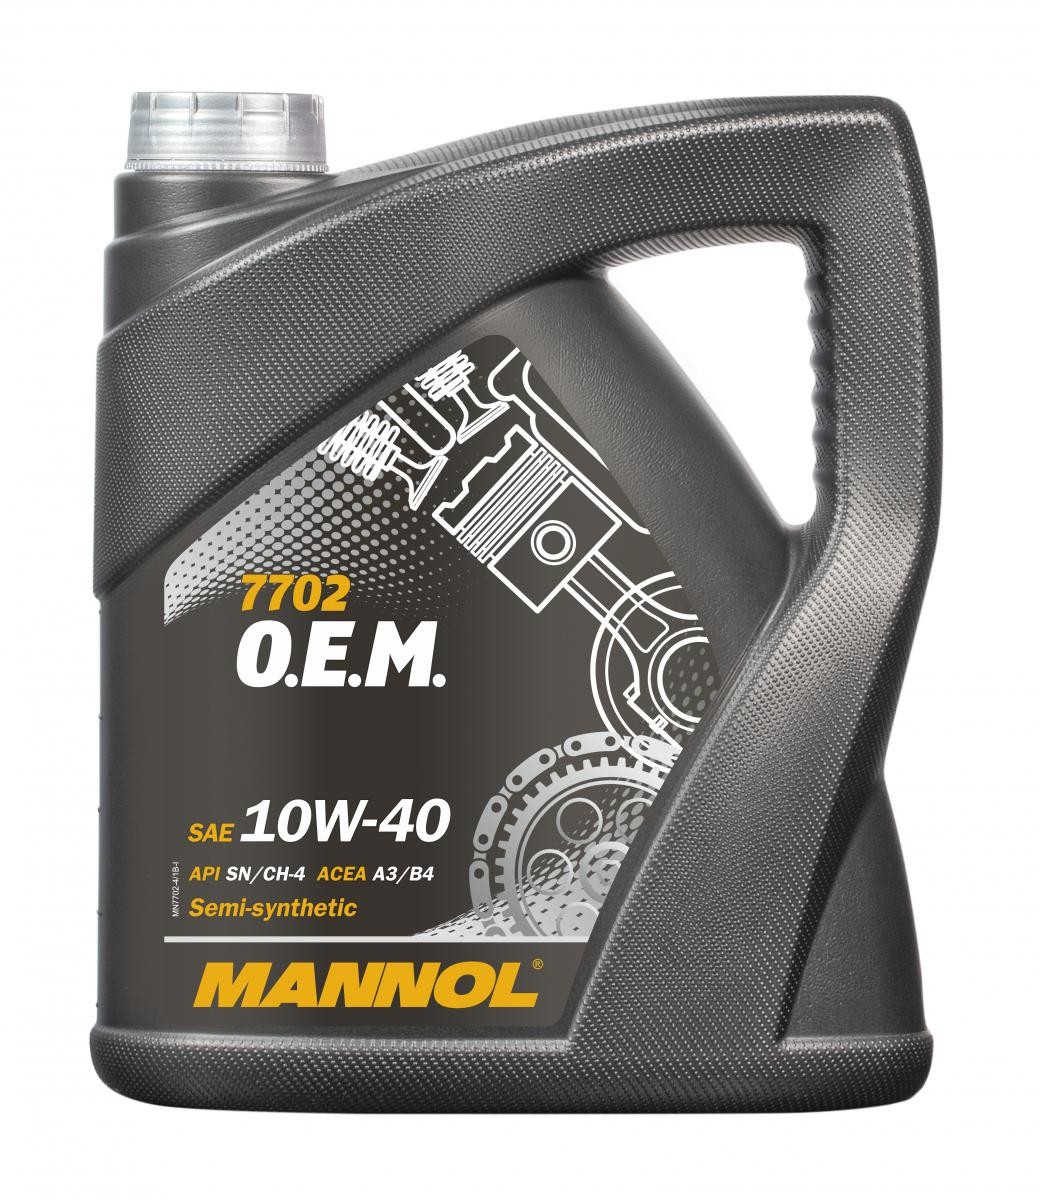 Engine oil MANNOL 10W-40, 4l, Part Synthetic Oil longlife MN7702-4